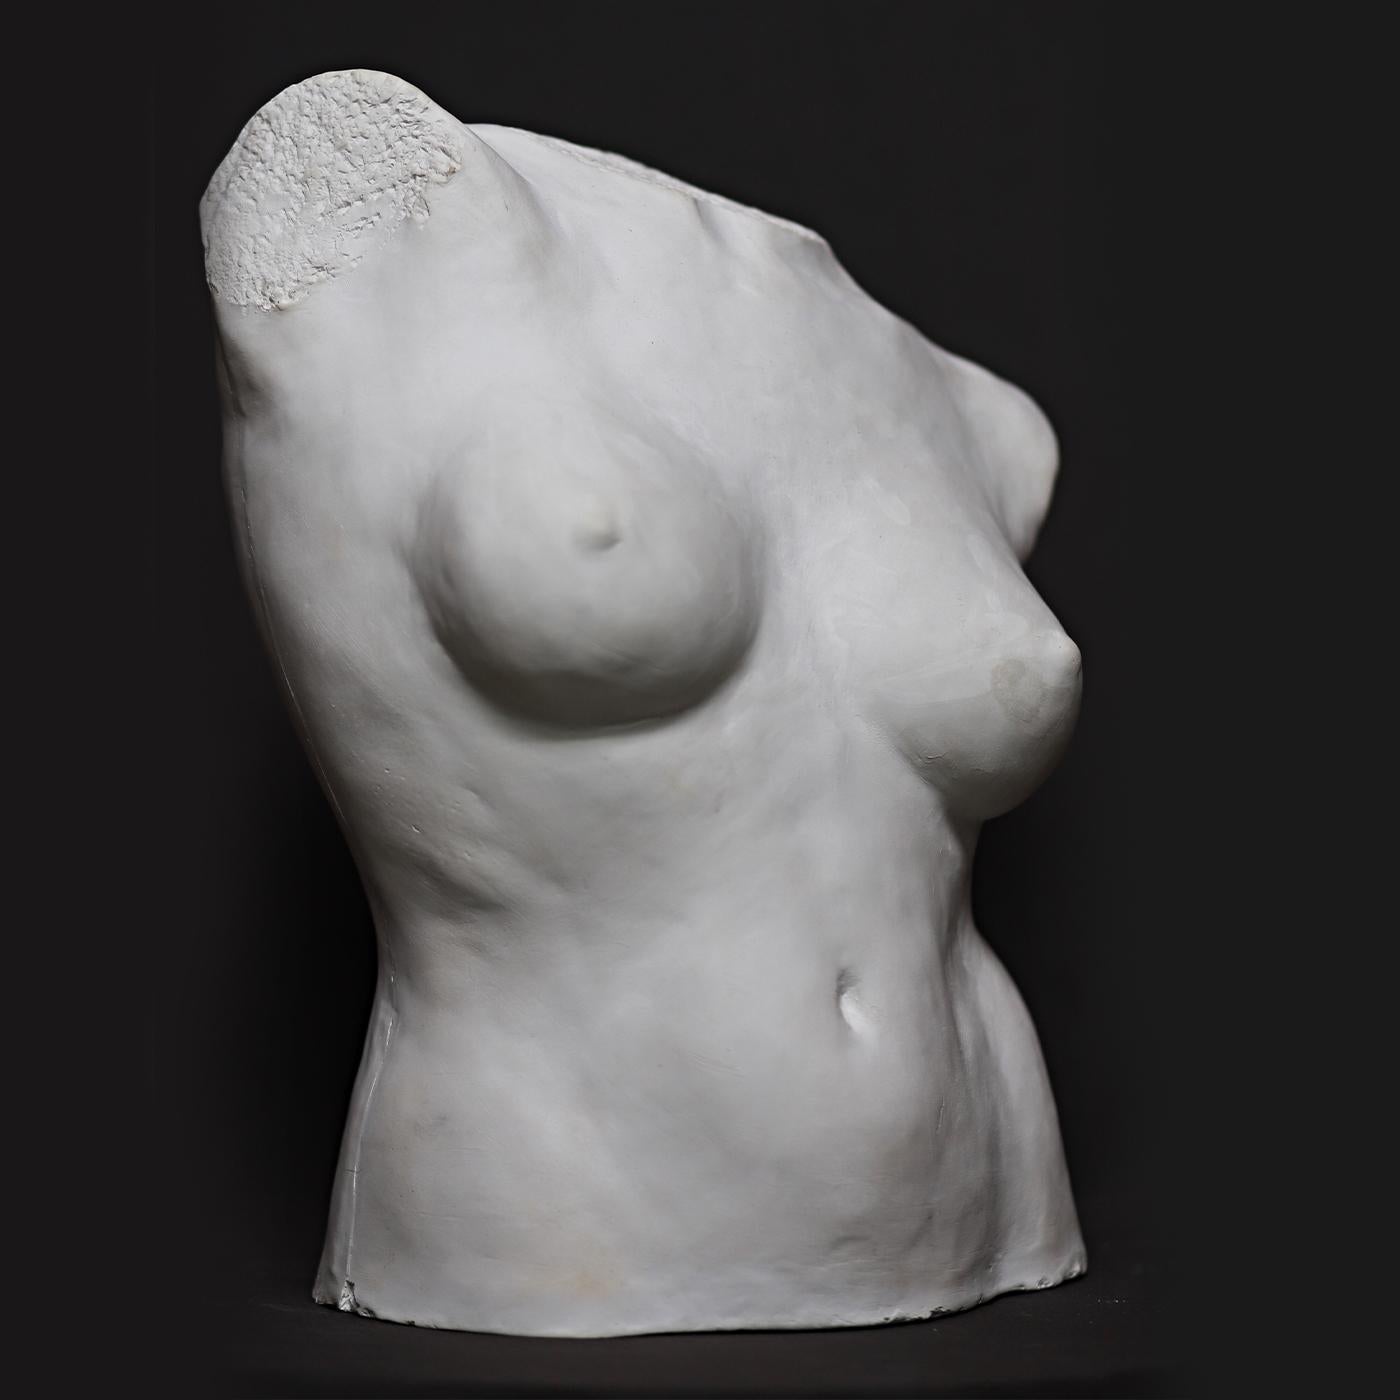 A glorious work of art by sculptor Raffaello Romanelli, this piece is an original and singular sculpture handcrafted of gypsum. It depicts the bust of a naked female body, imbued with great dynamism and sinuous movement. A precious design piece that